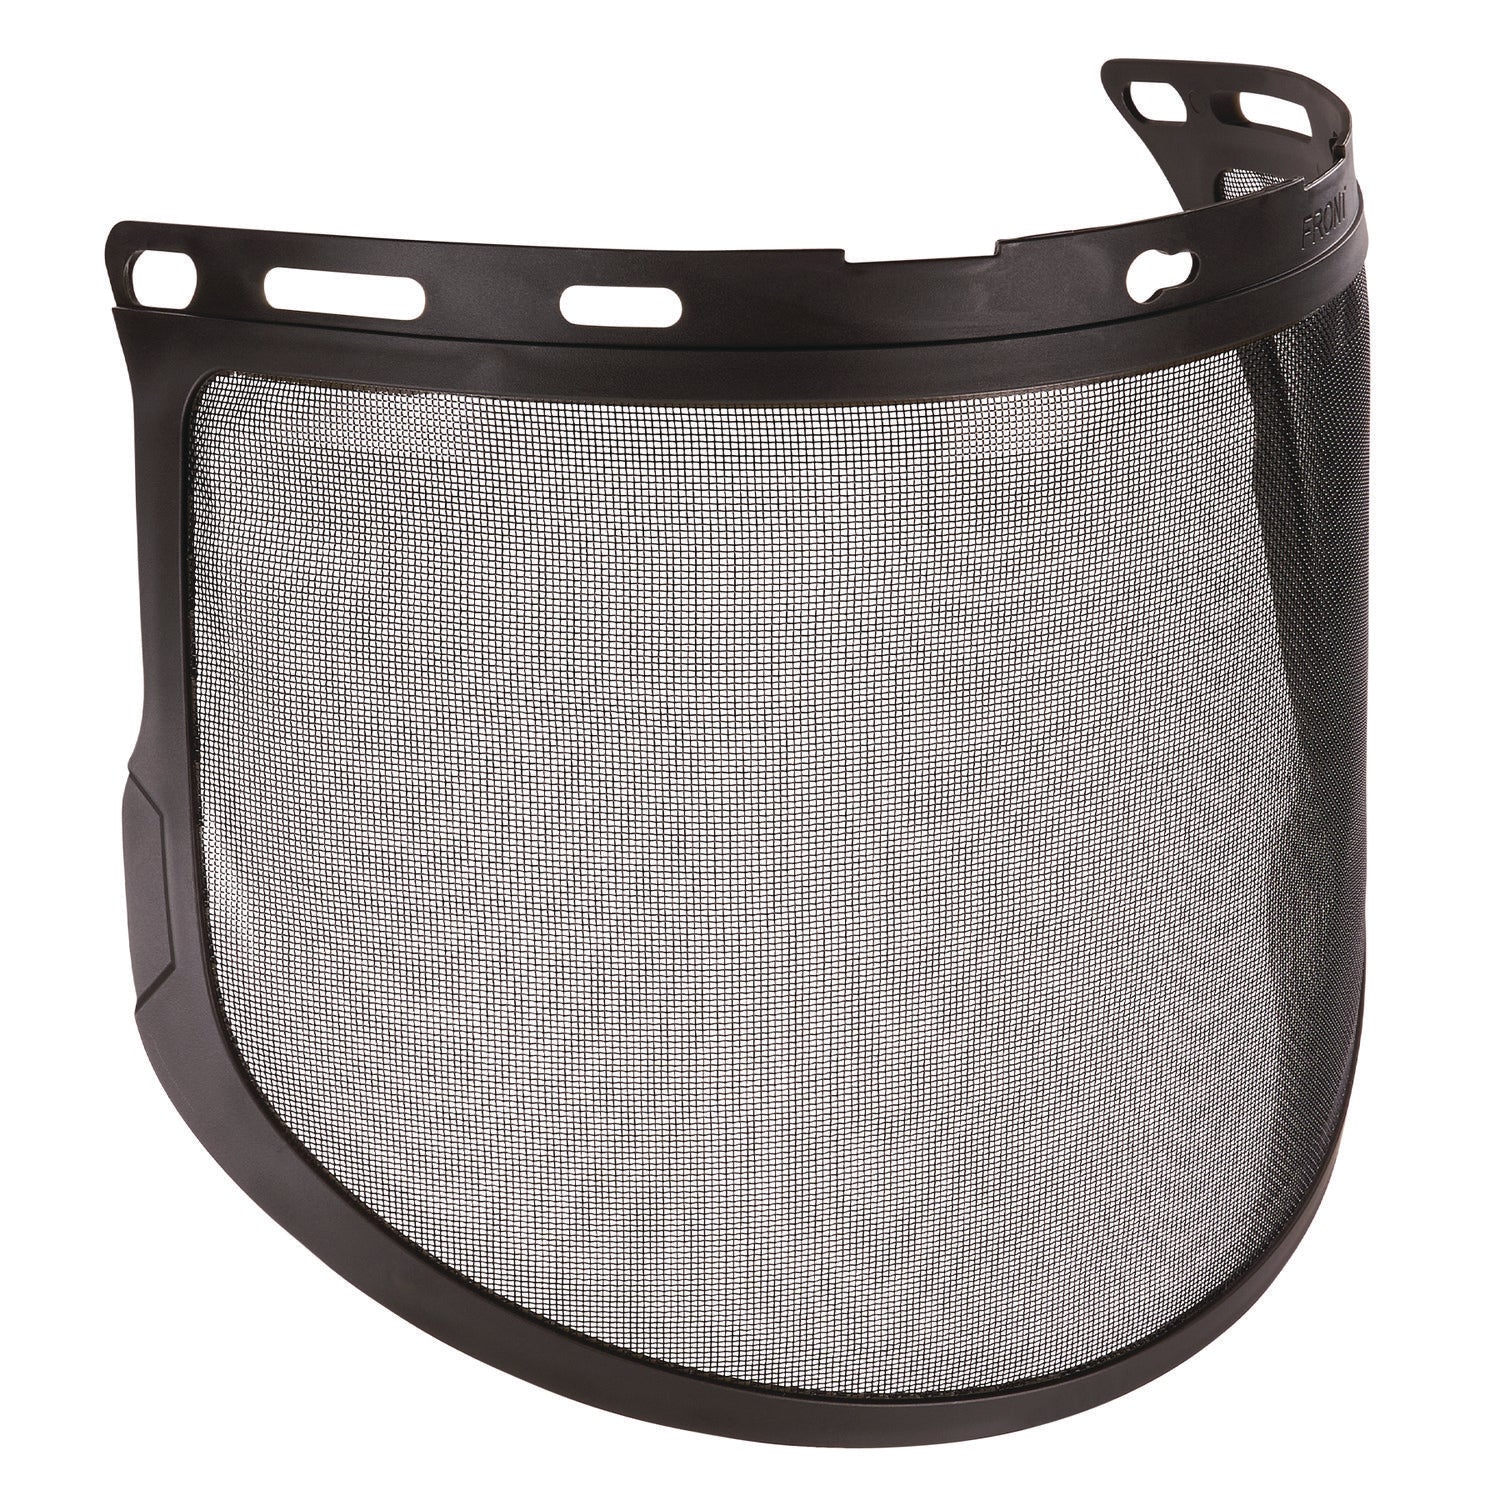 skullerz-8999-mesh-face-shield-replacement-for-hard-hat-and-safety-helmet-black-ships-in-1-3-business-days_ego60253 - 1